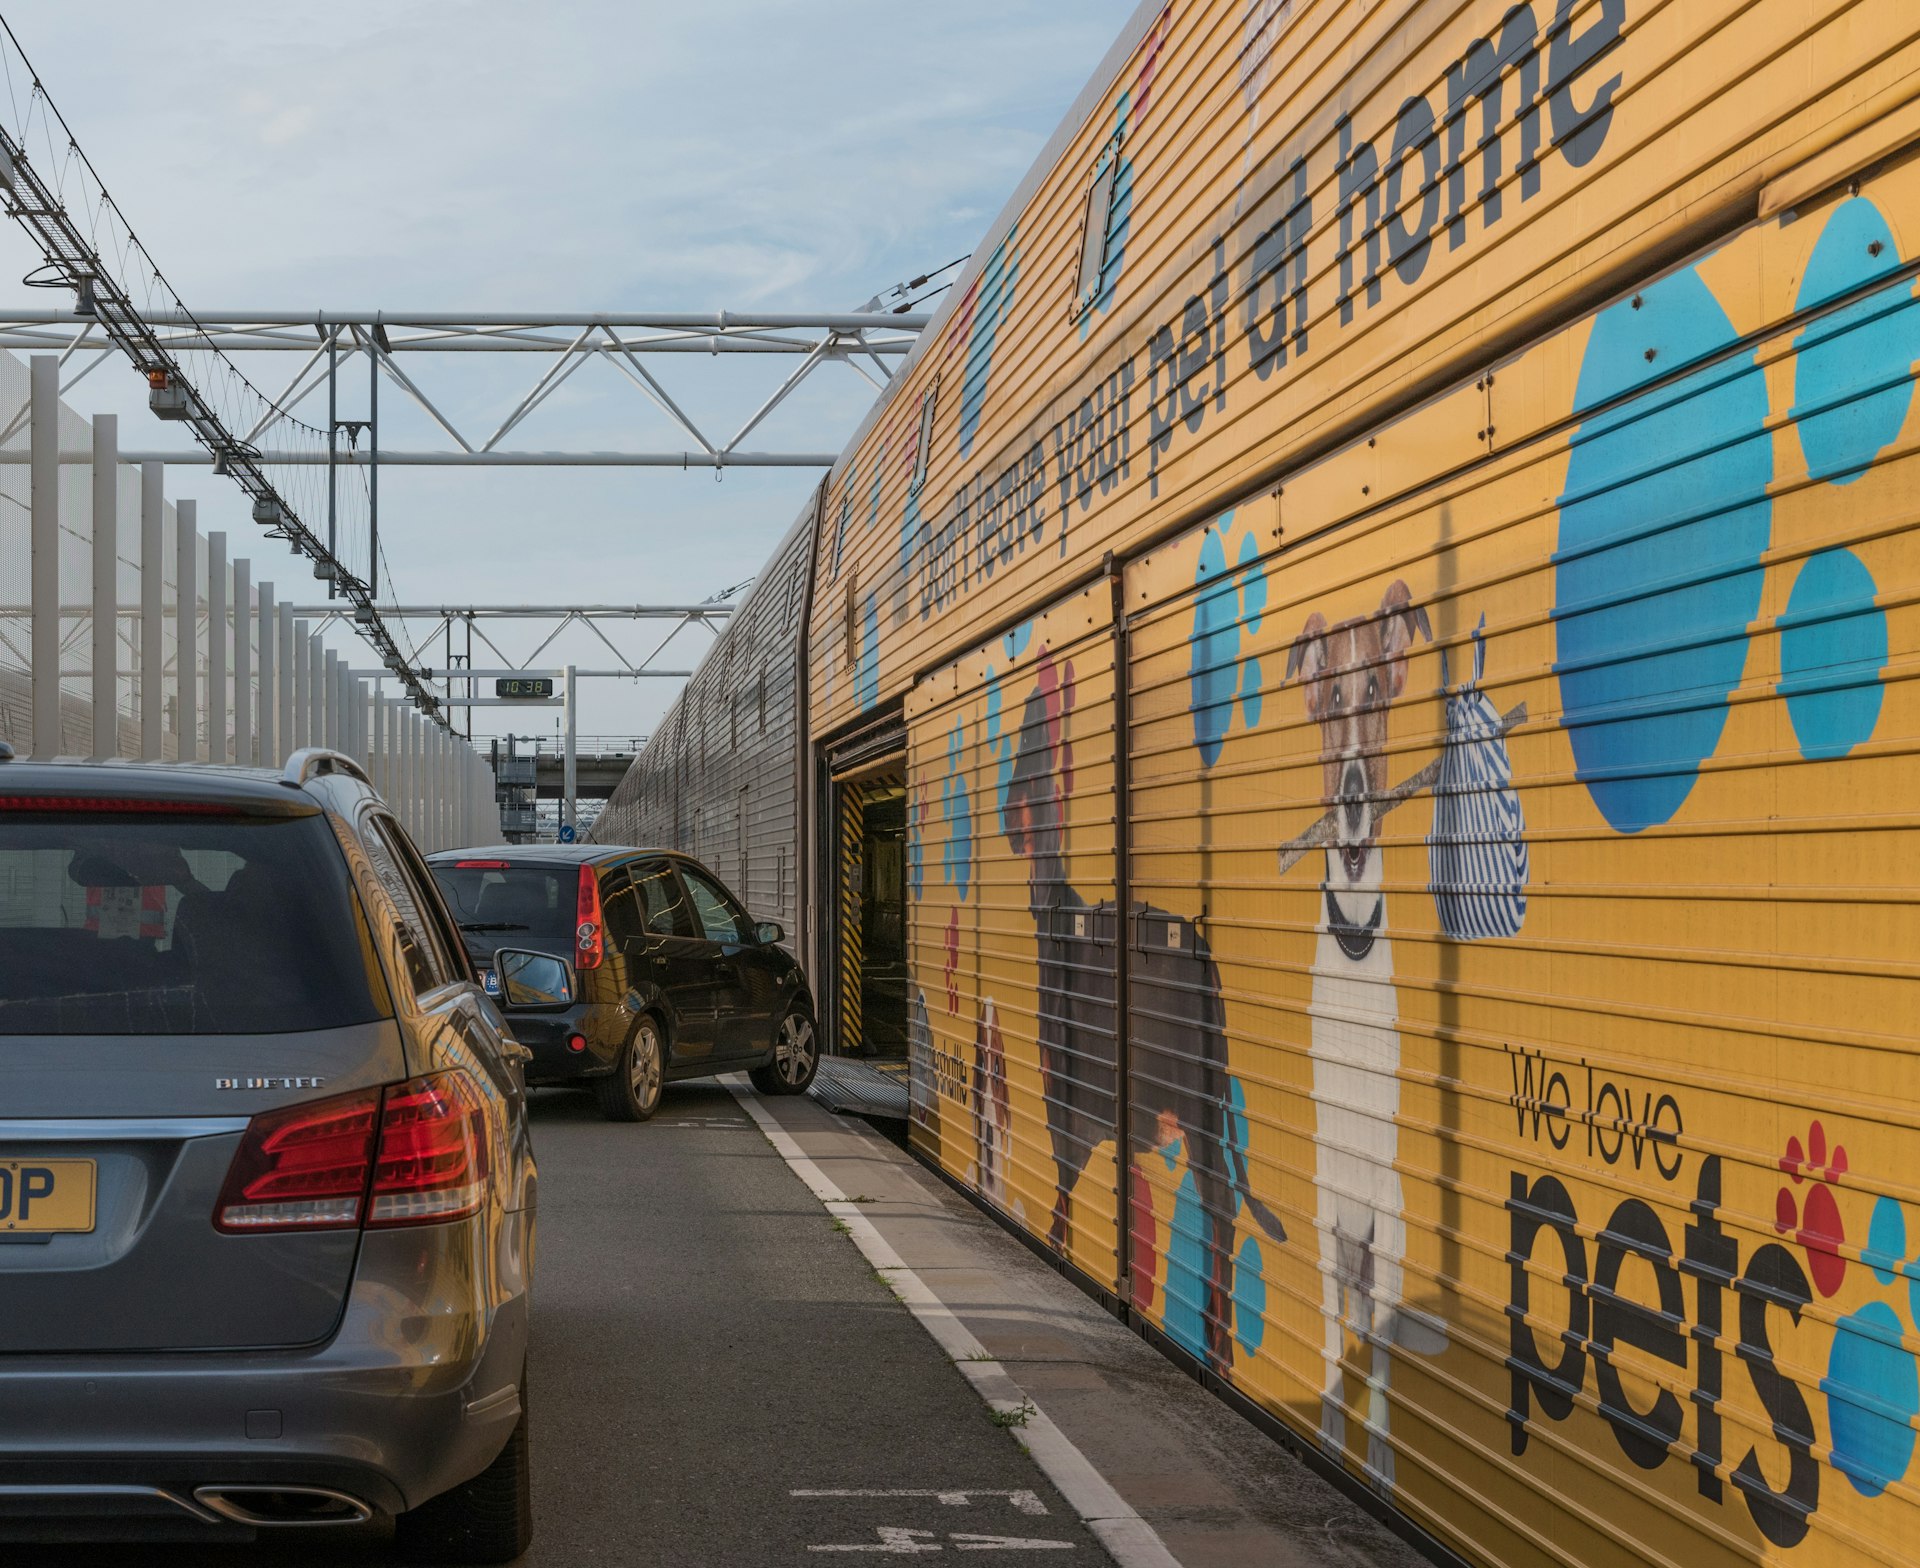 Two cars are preparing to drive onto a Eurotunnel train